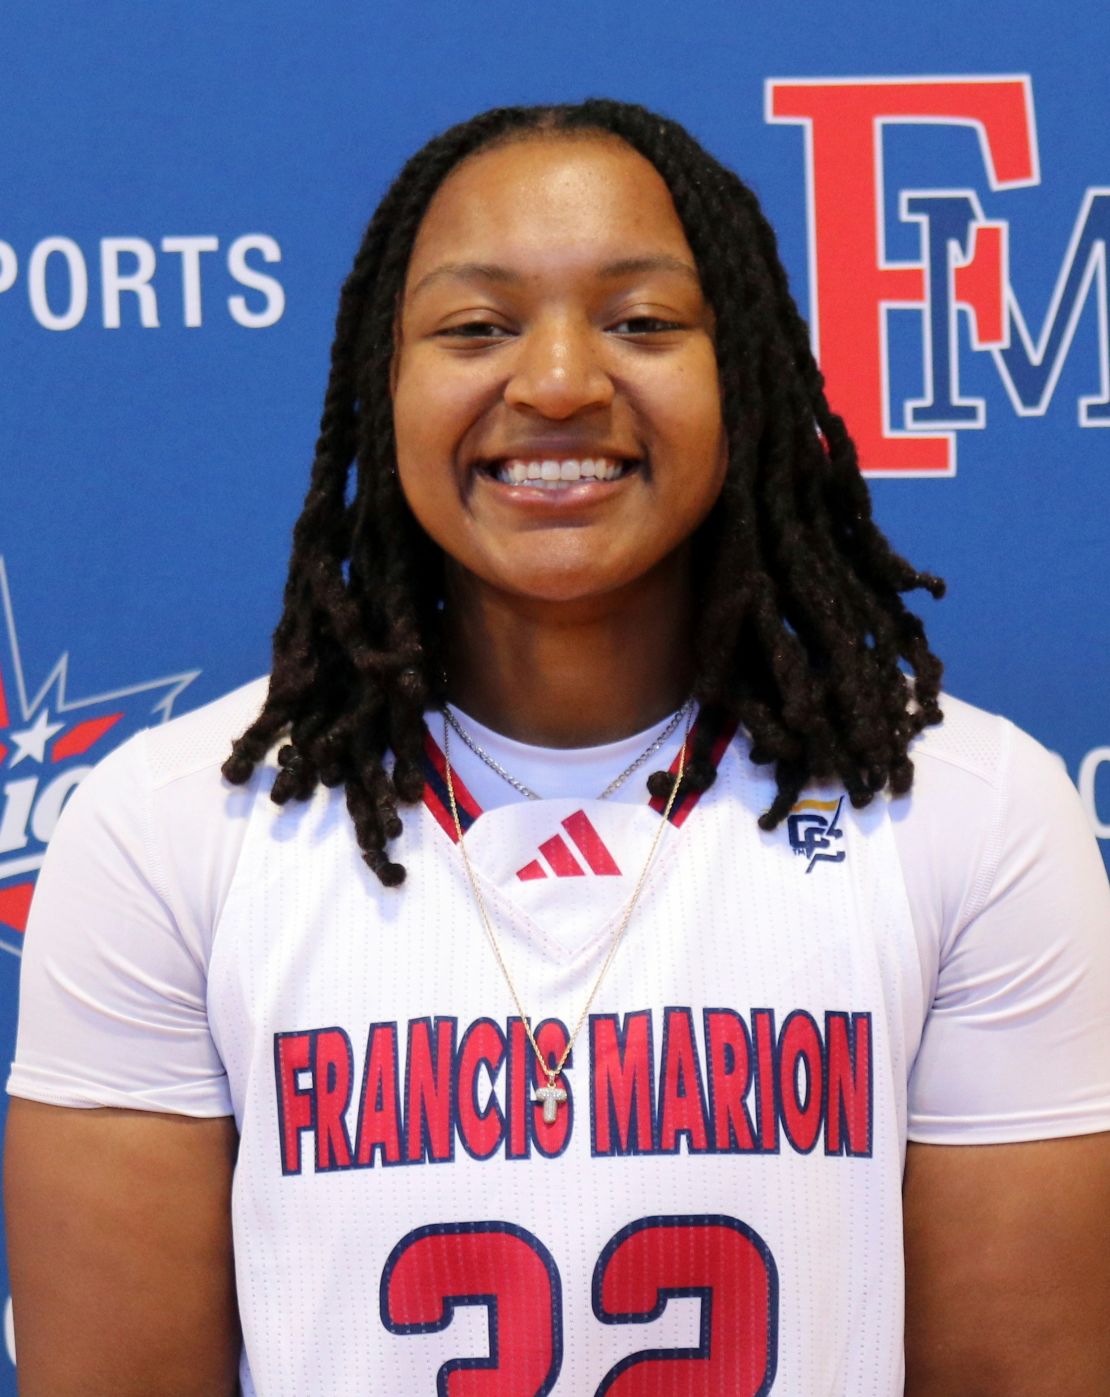 Lauryn Taylor recorded 44 rebounds in a single game.